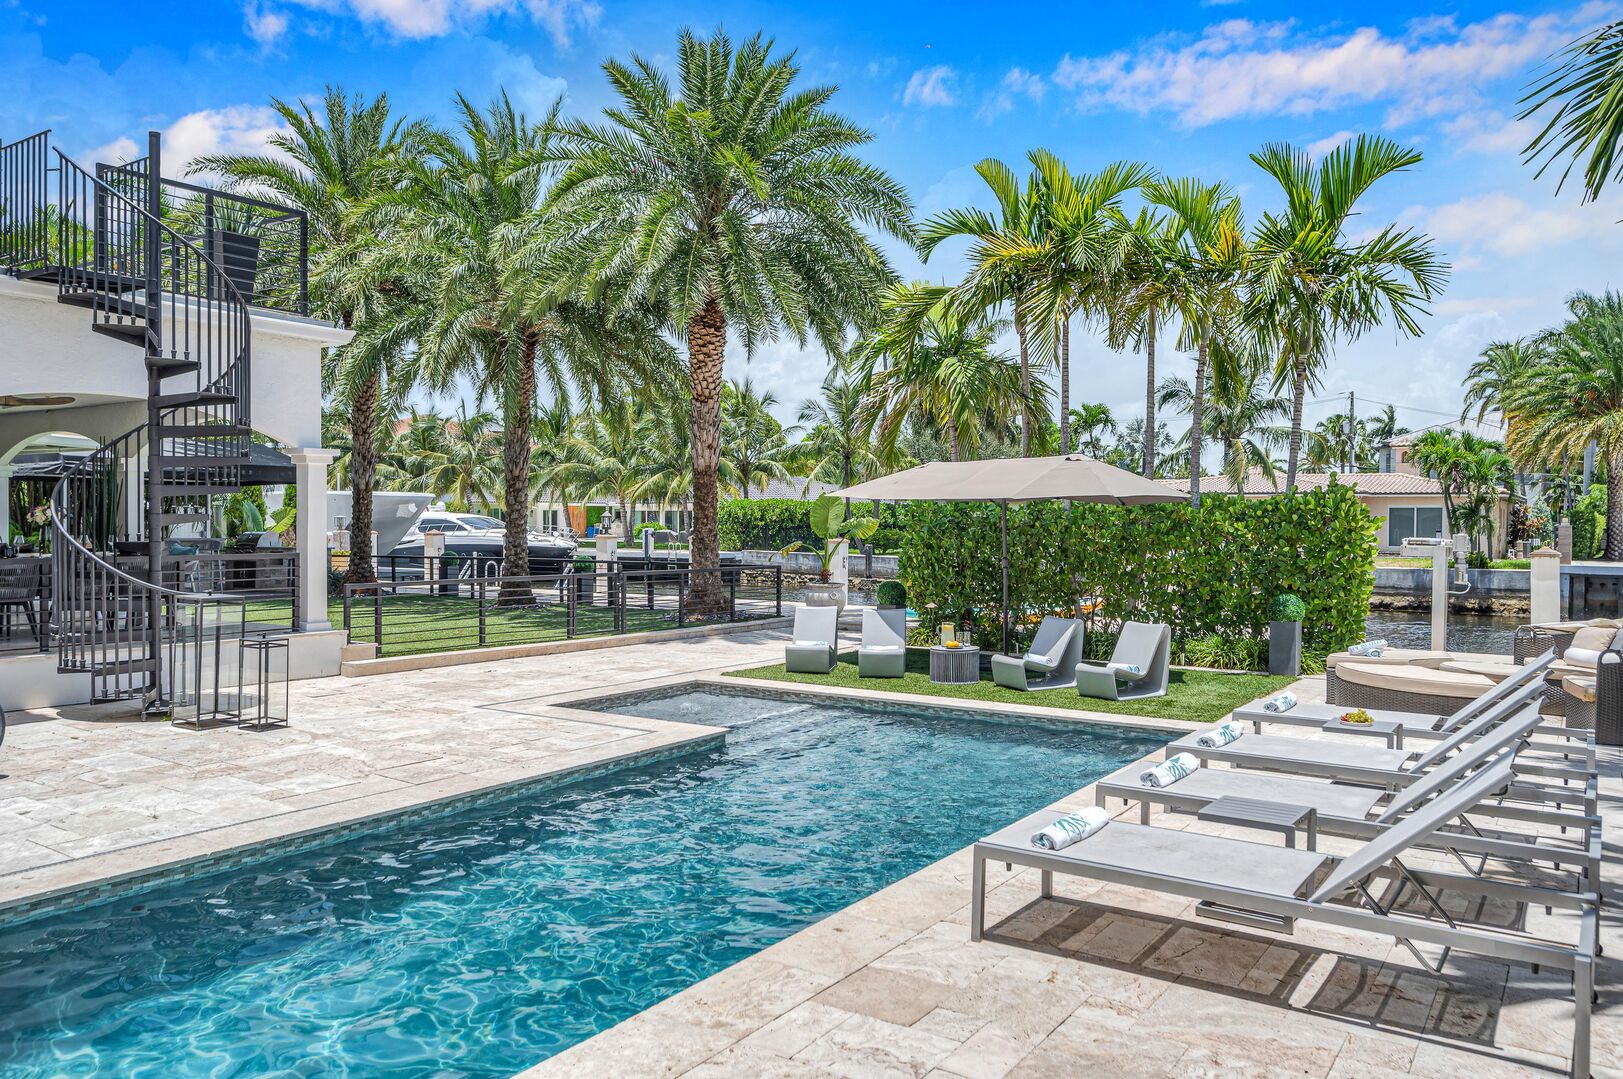 Relish in water front tranquility from the heated pool with its swim shelf and lounge areas.